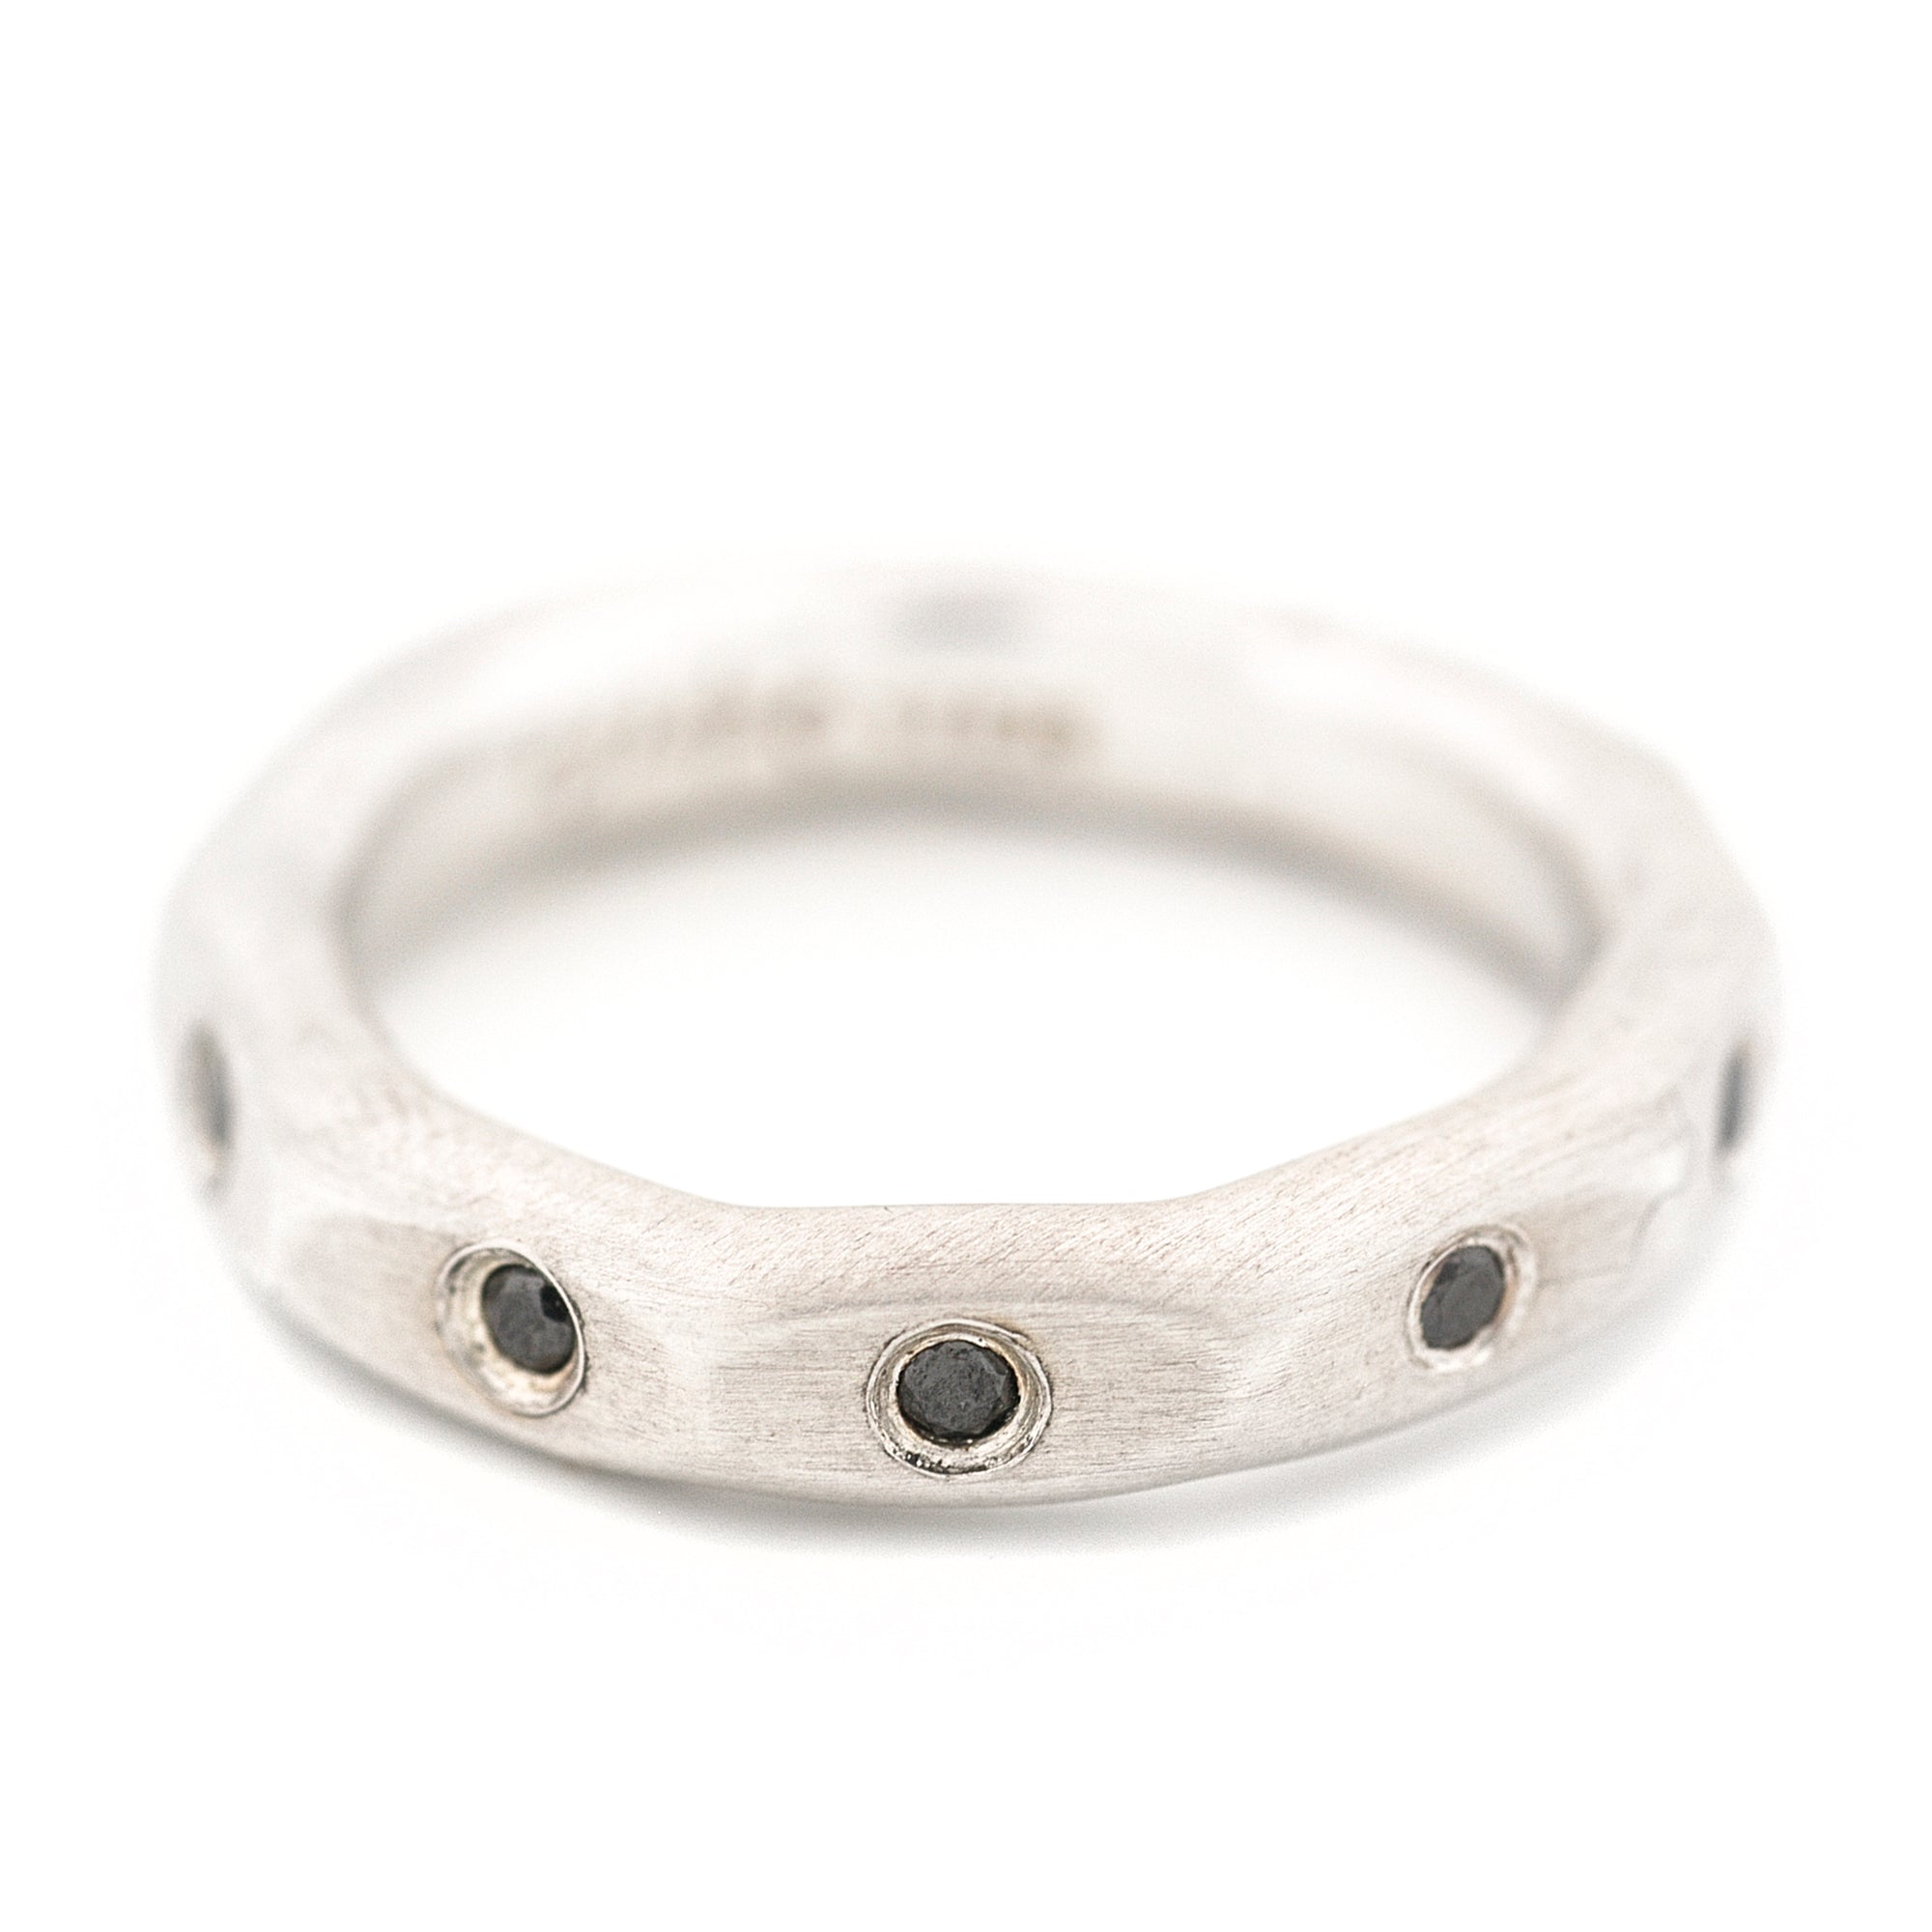 Sterling Stacking Ring with Black Diamonds